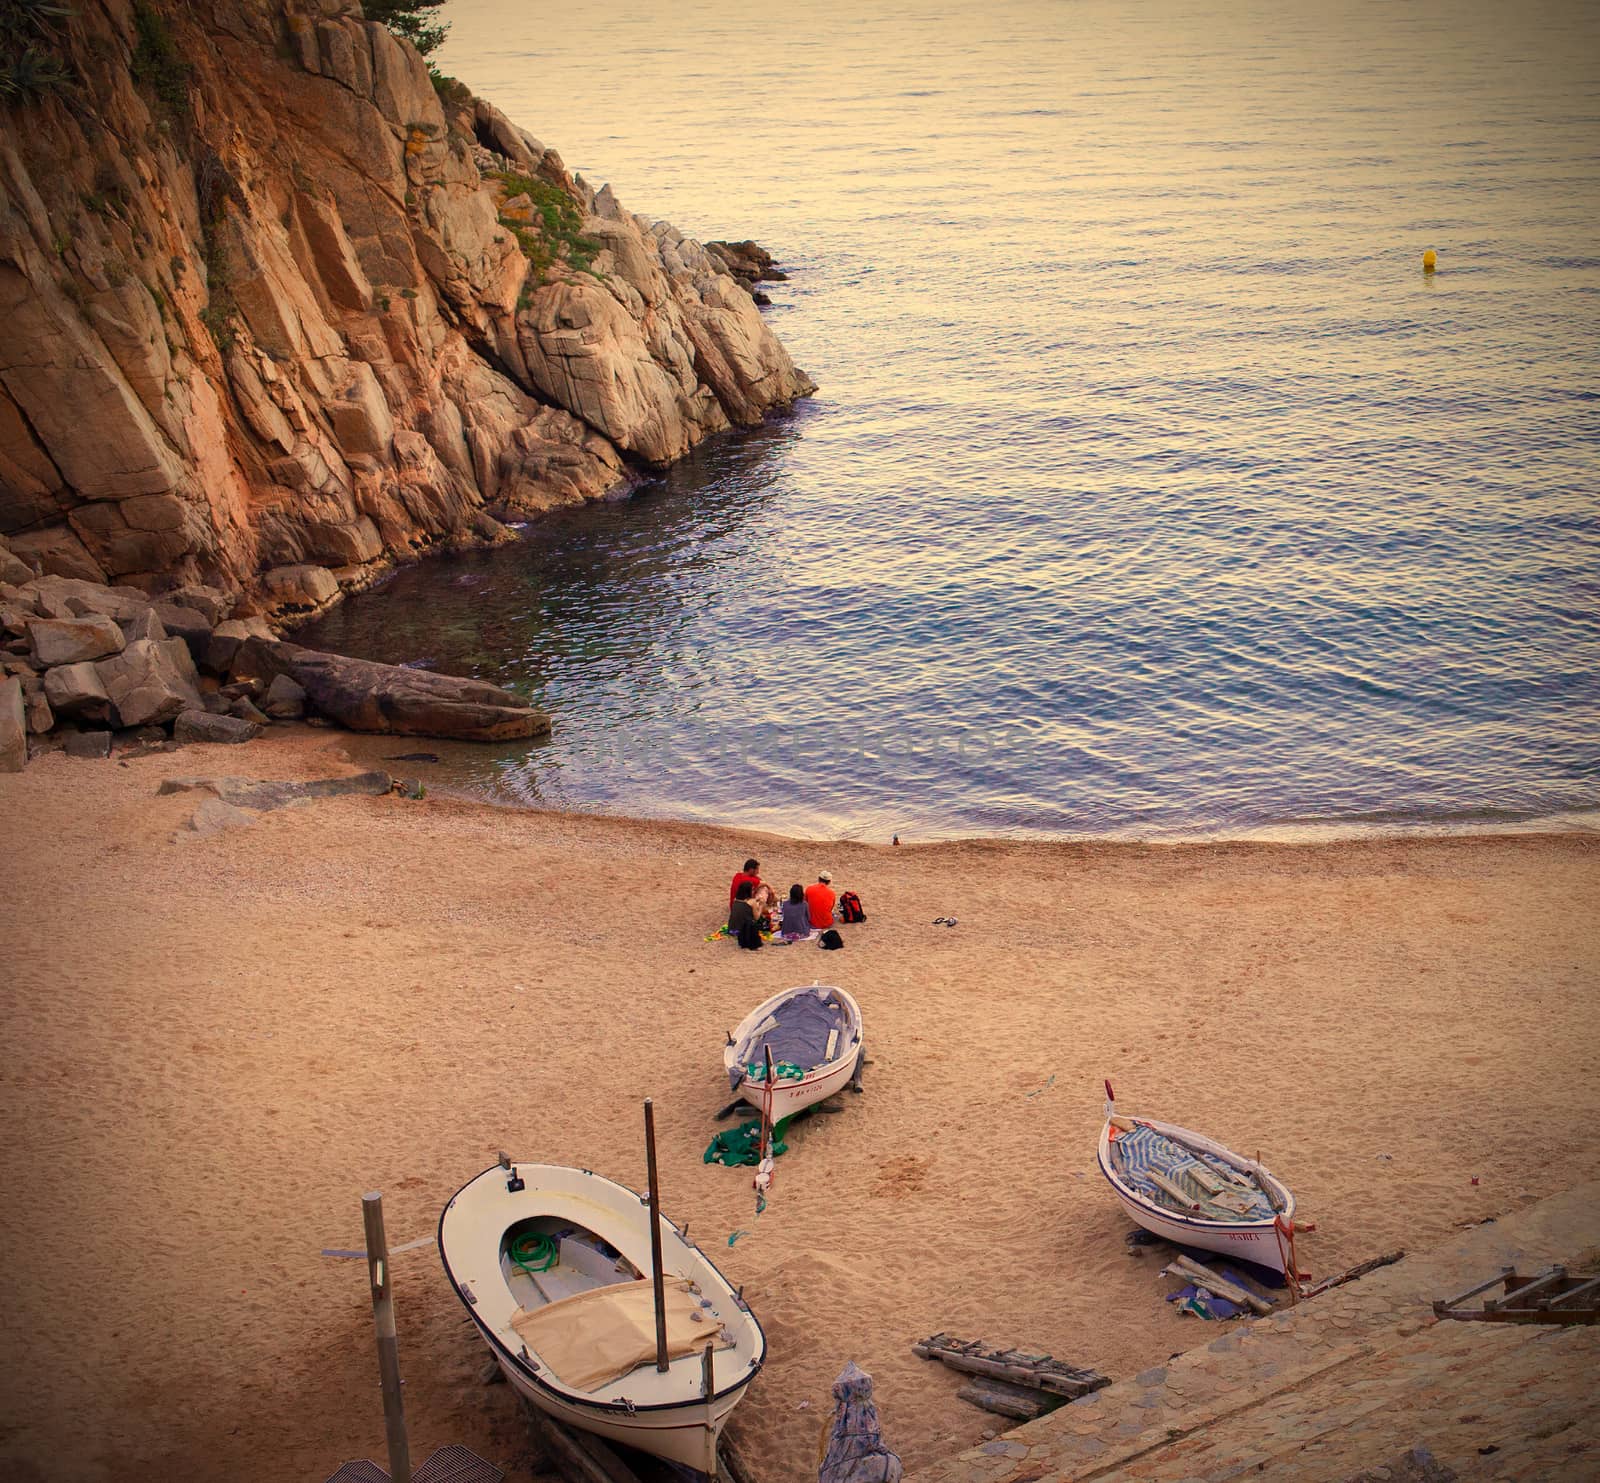 Tossa de Mar, Catalonia, a quiet evening on the beach with white by Astroid